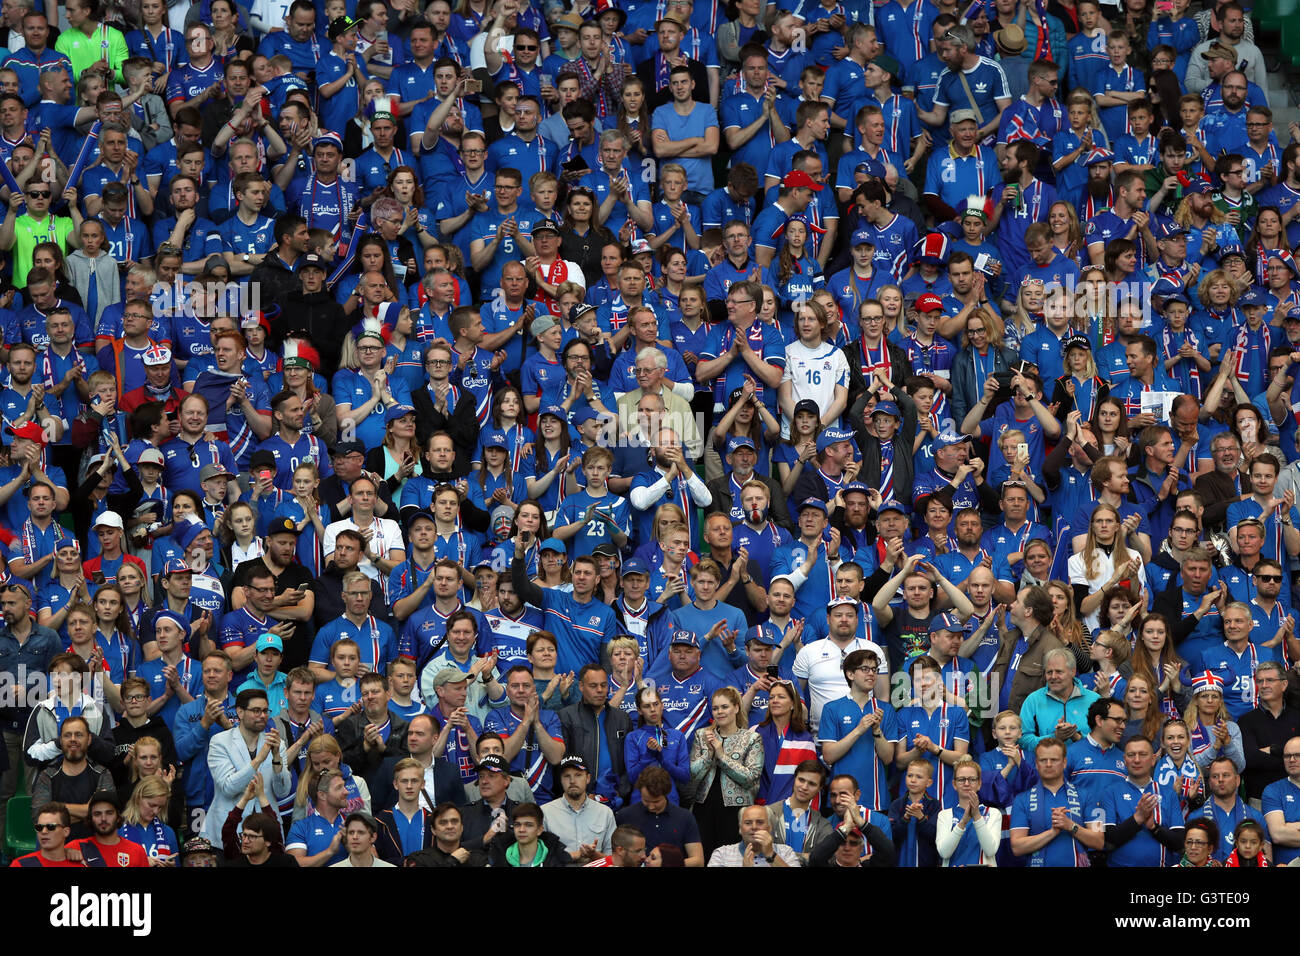 SAINT ETIENNE- FRANCE,  J UNE 2016 :  fans and supporterson the stands in football match  of Euro 2016  in France between Portugal vs Iceland at the stade geoffroy guichard on June 14, 2016 in Saint Etienne Stock Photo